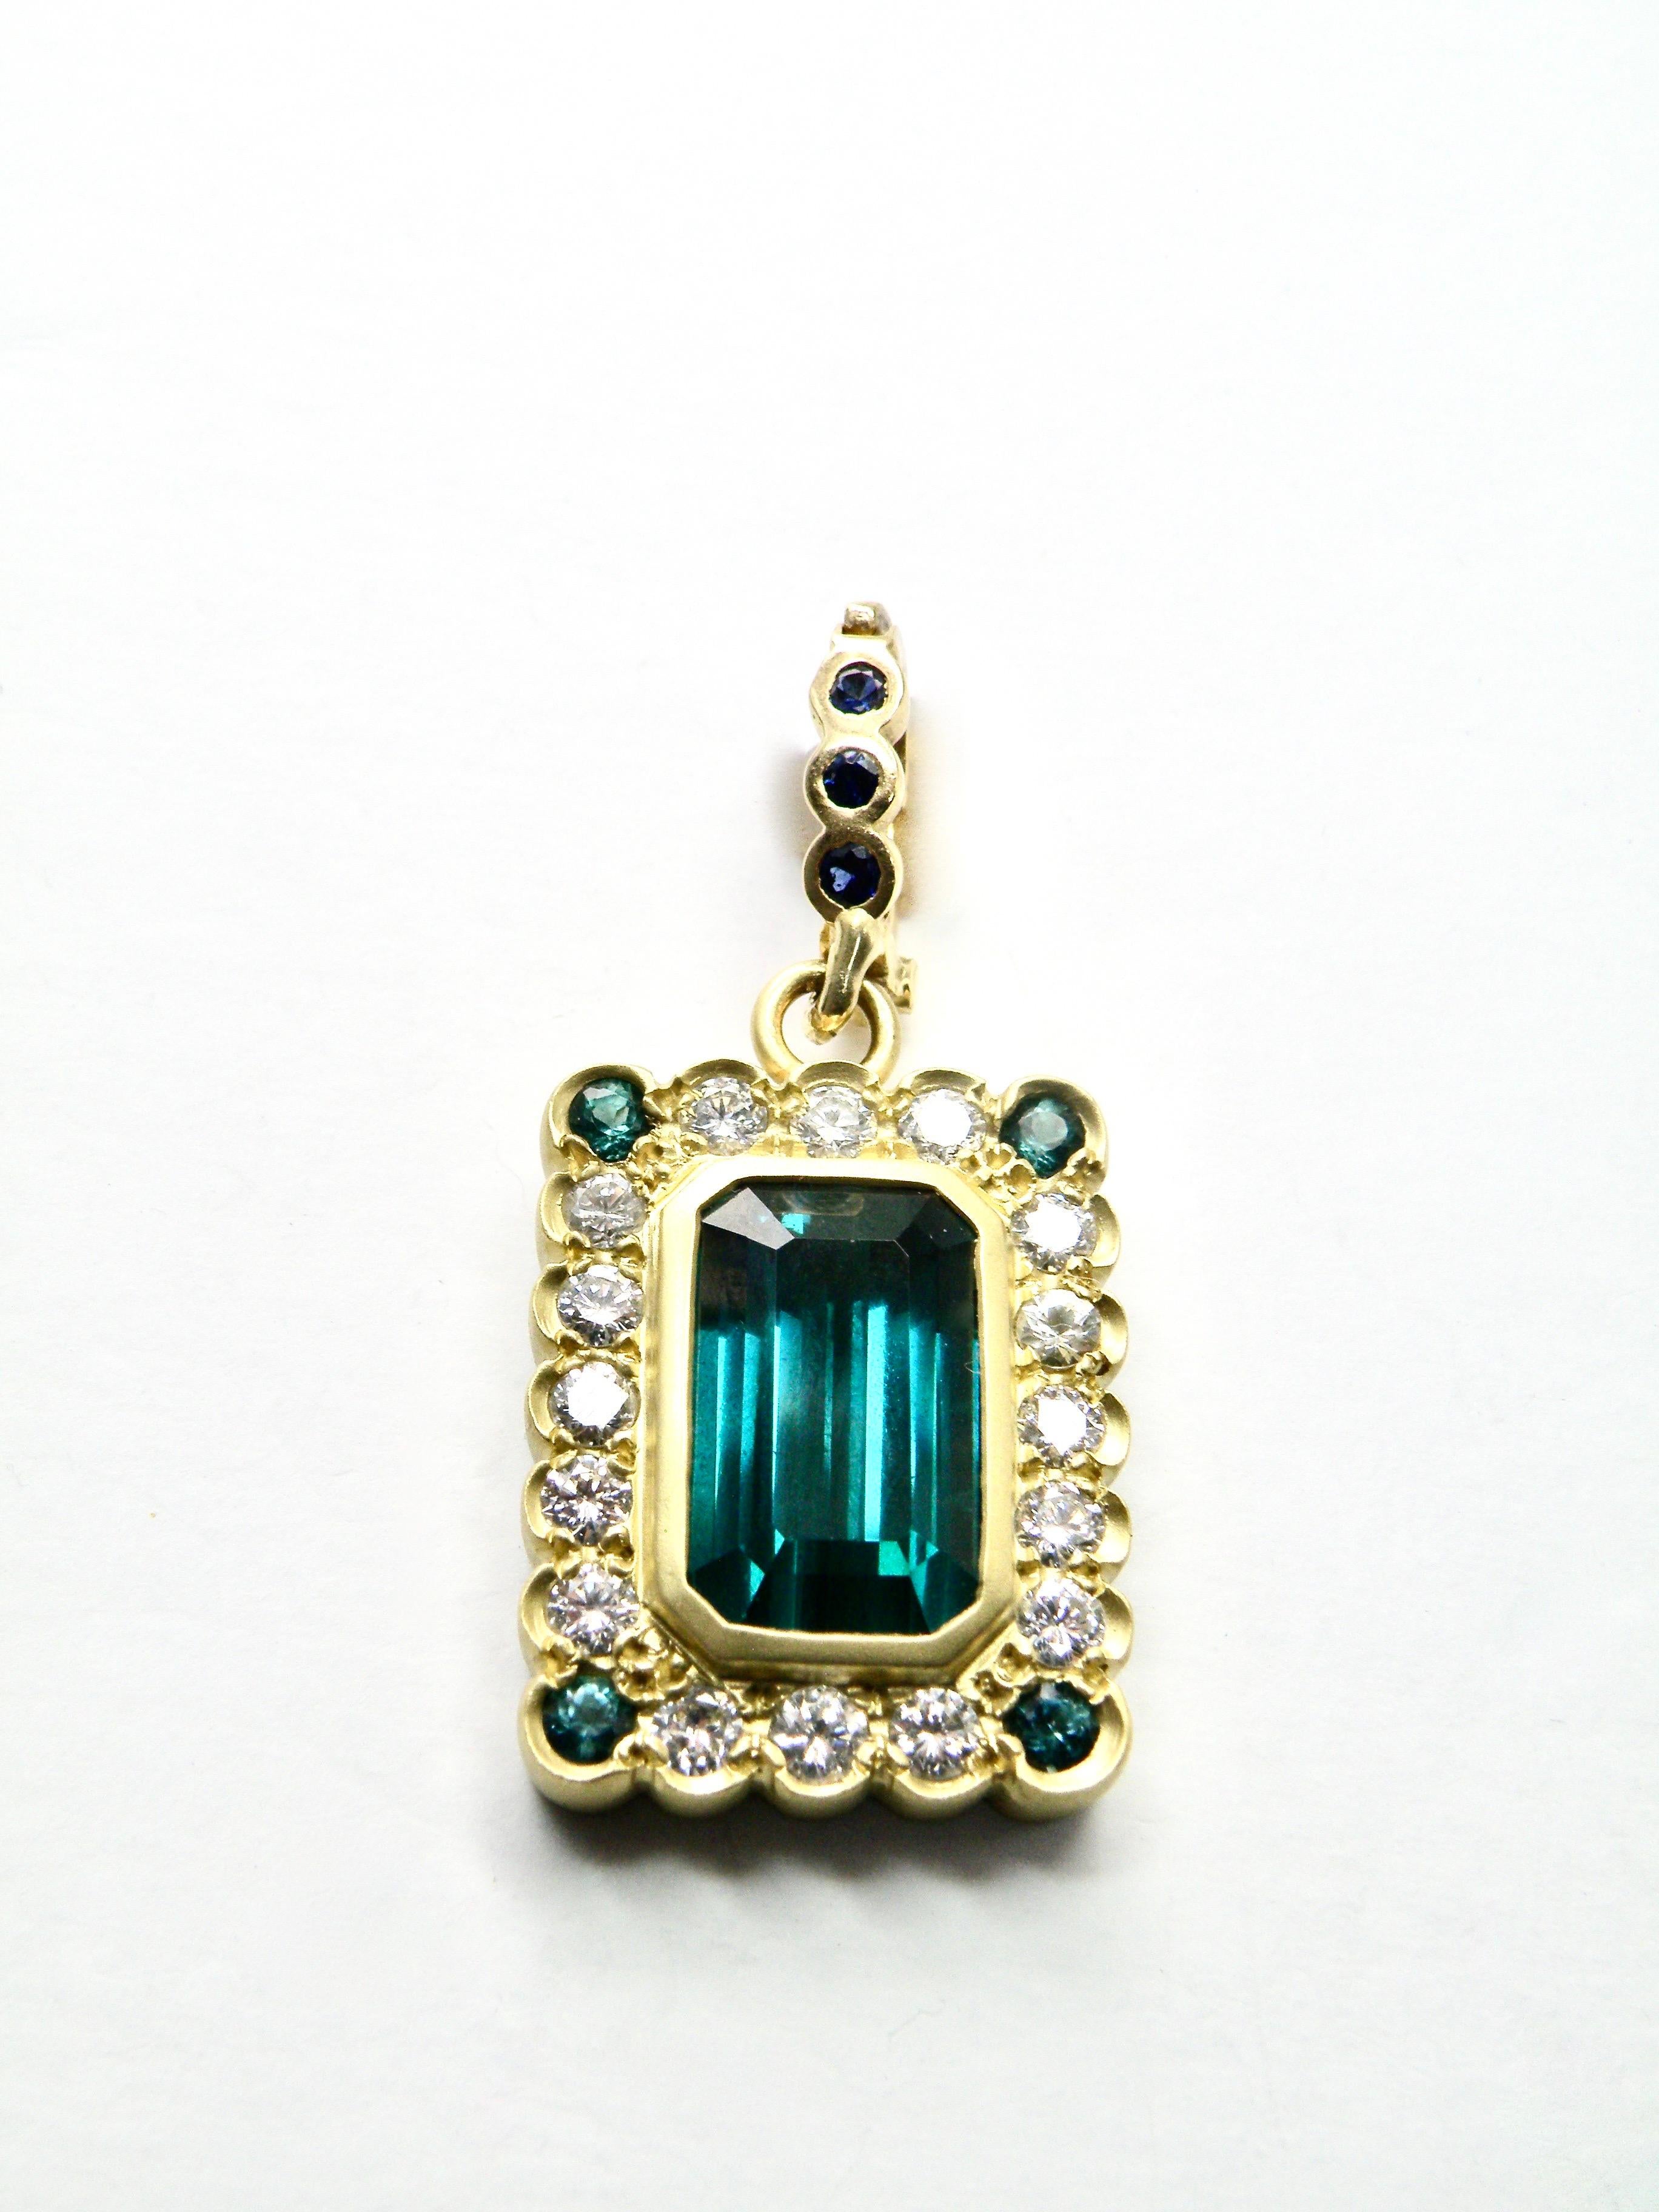 Contemporary 18K Diamond and Green Afghan Tourmaline Pendant For Sale